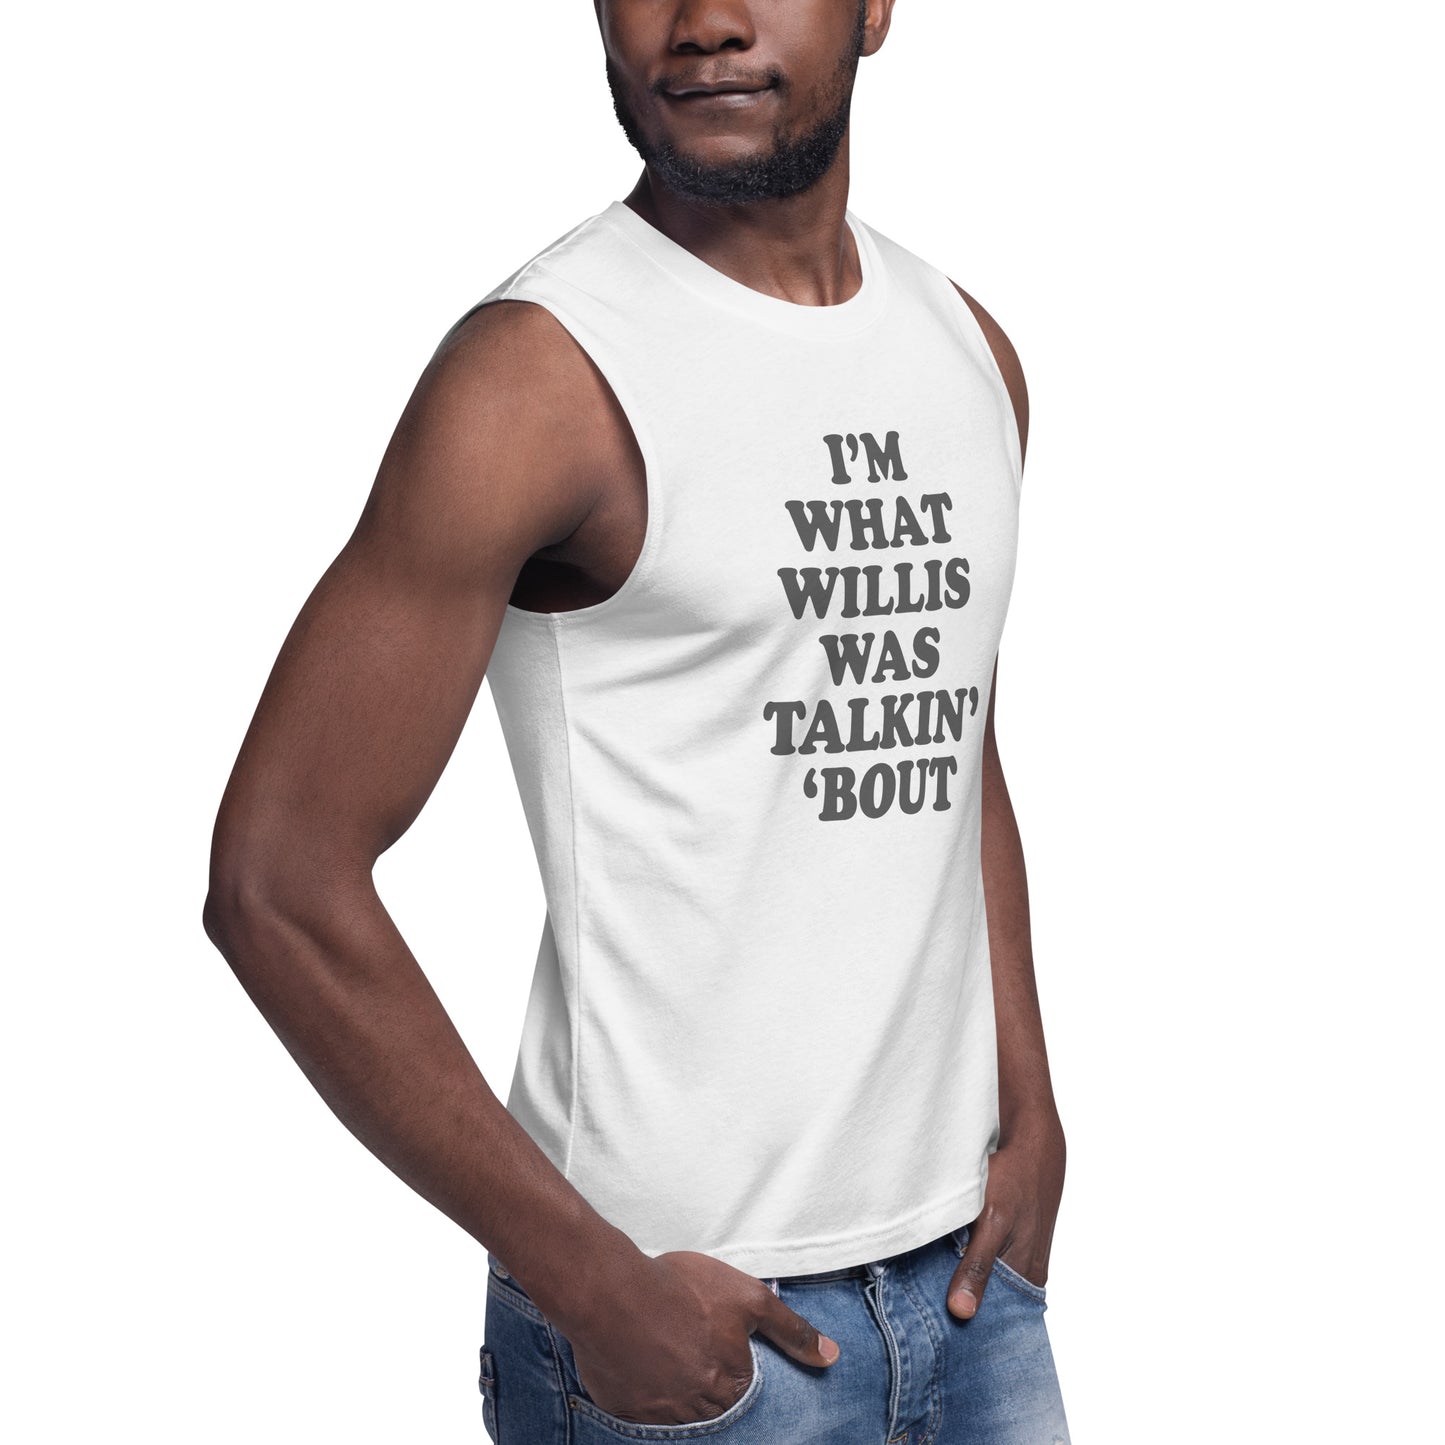 "I'm What Willis Was Talkin Bout" Muscle Shirt